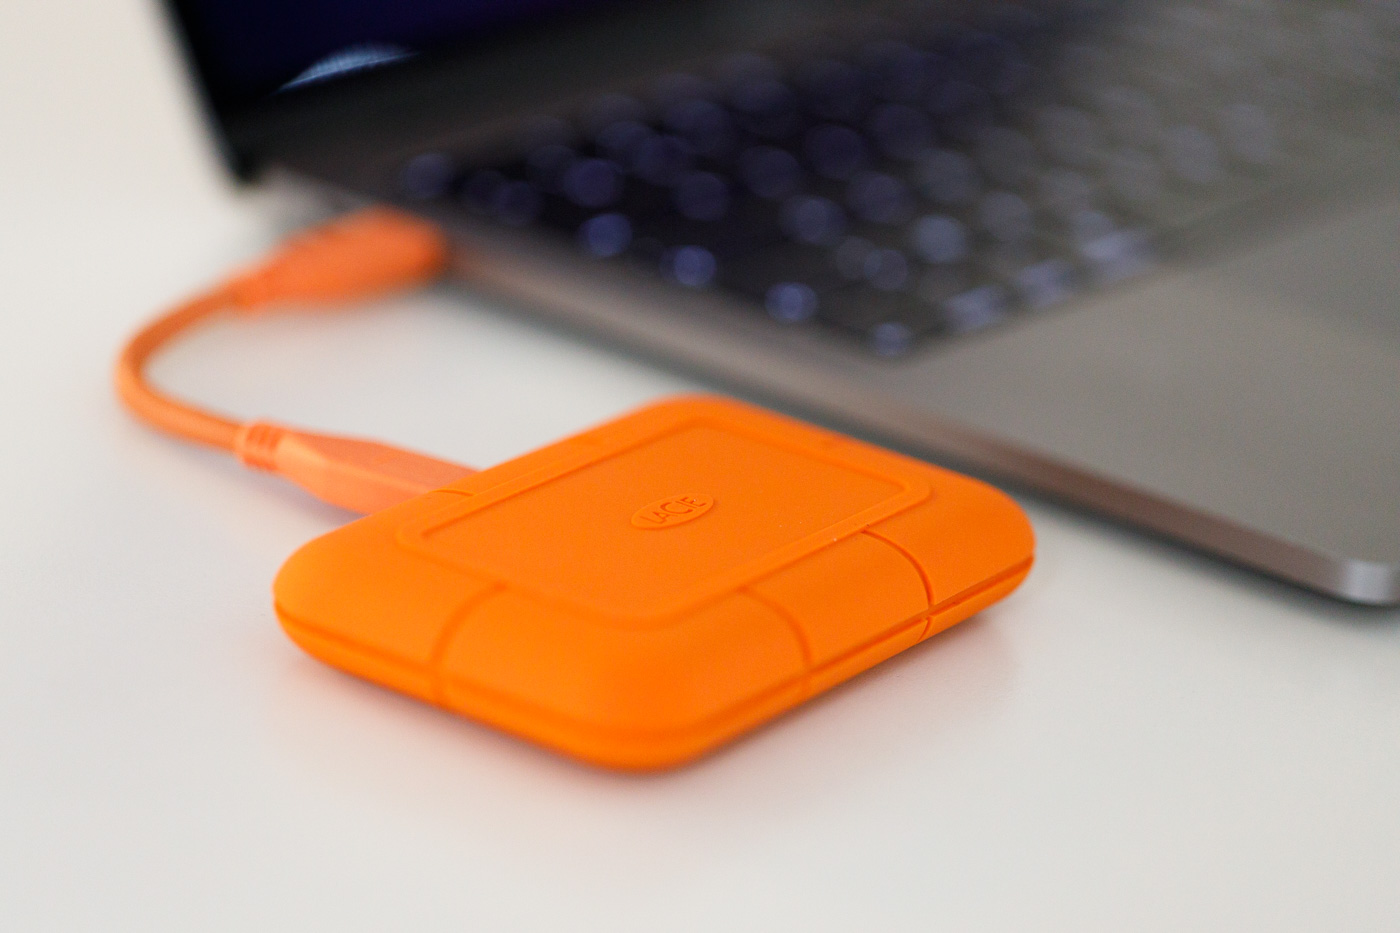 LaCie Rugged SSD Pro 4 To - Disque SSD externe 2,5 Thunderbolt 3